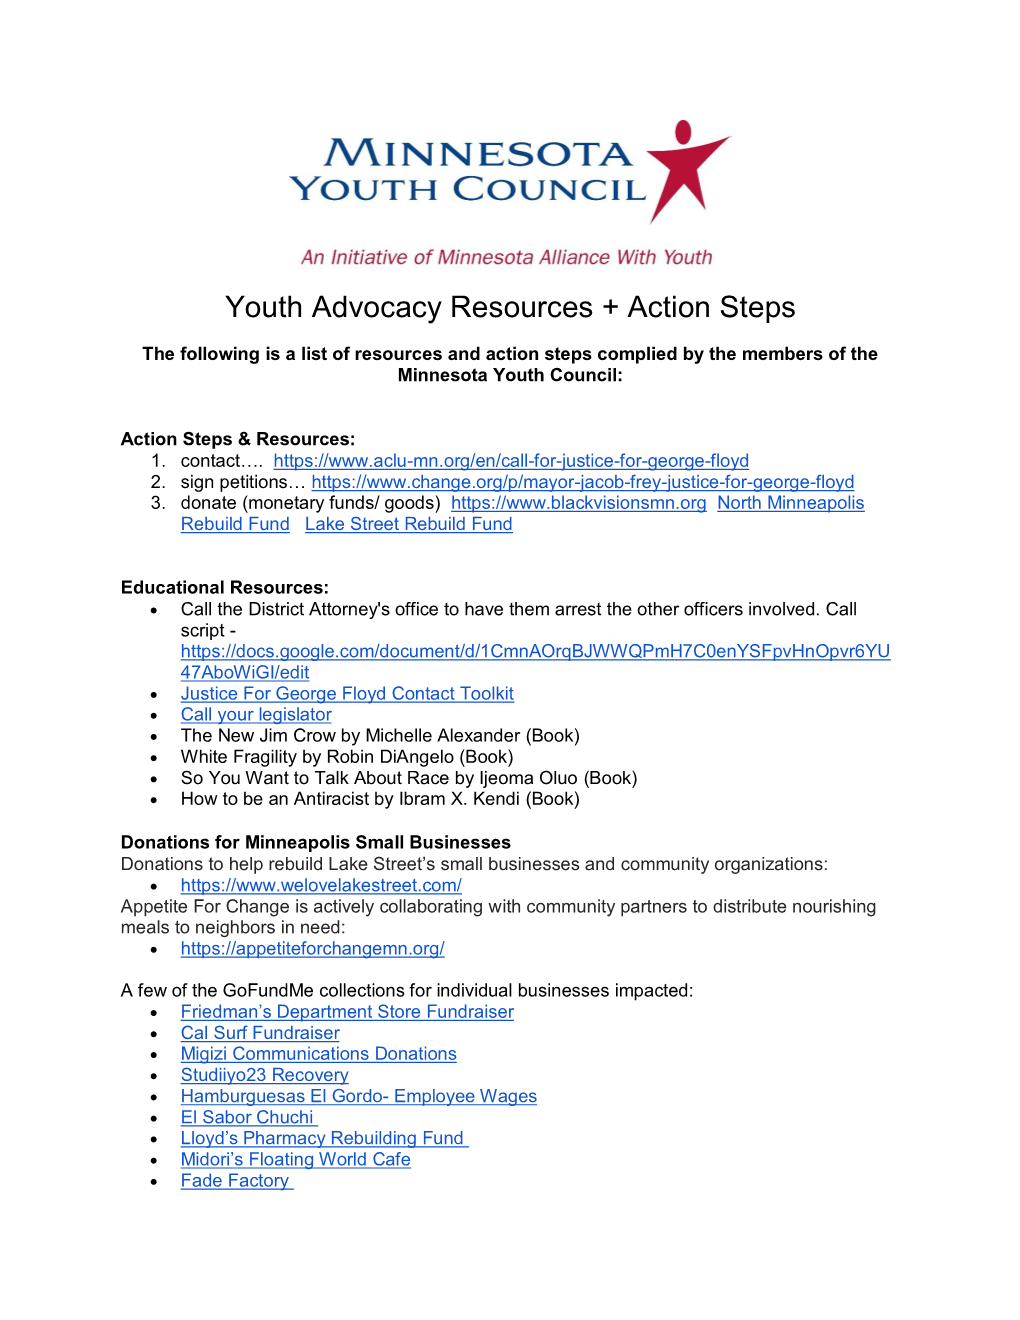 Youth Advocacy Resources + Action Steps